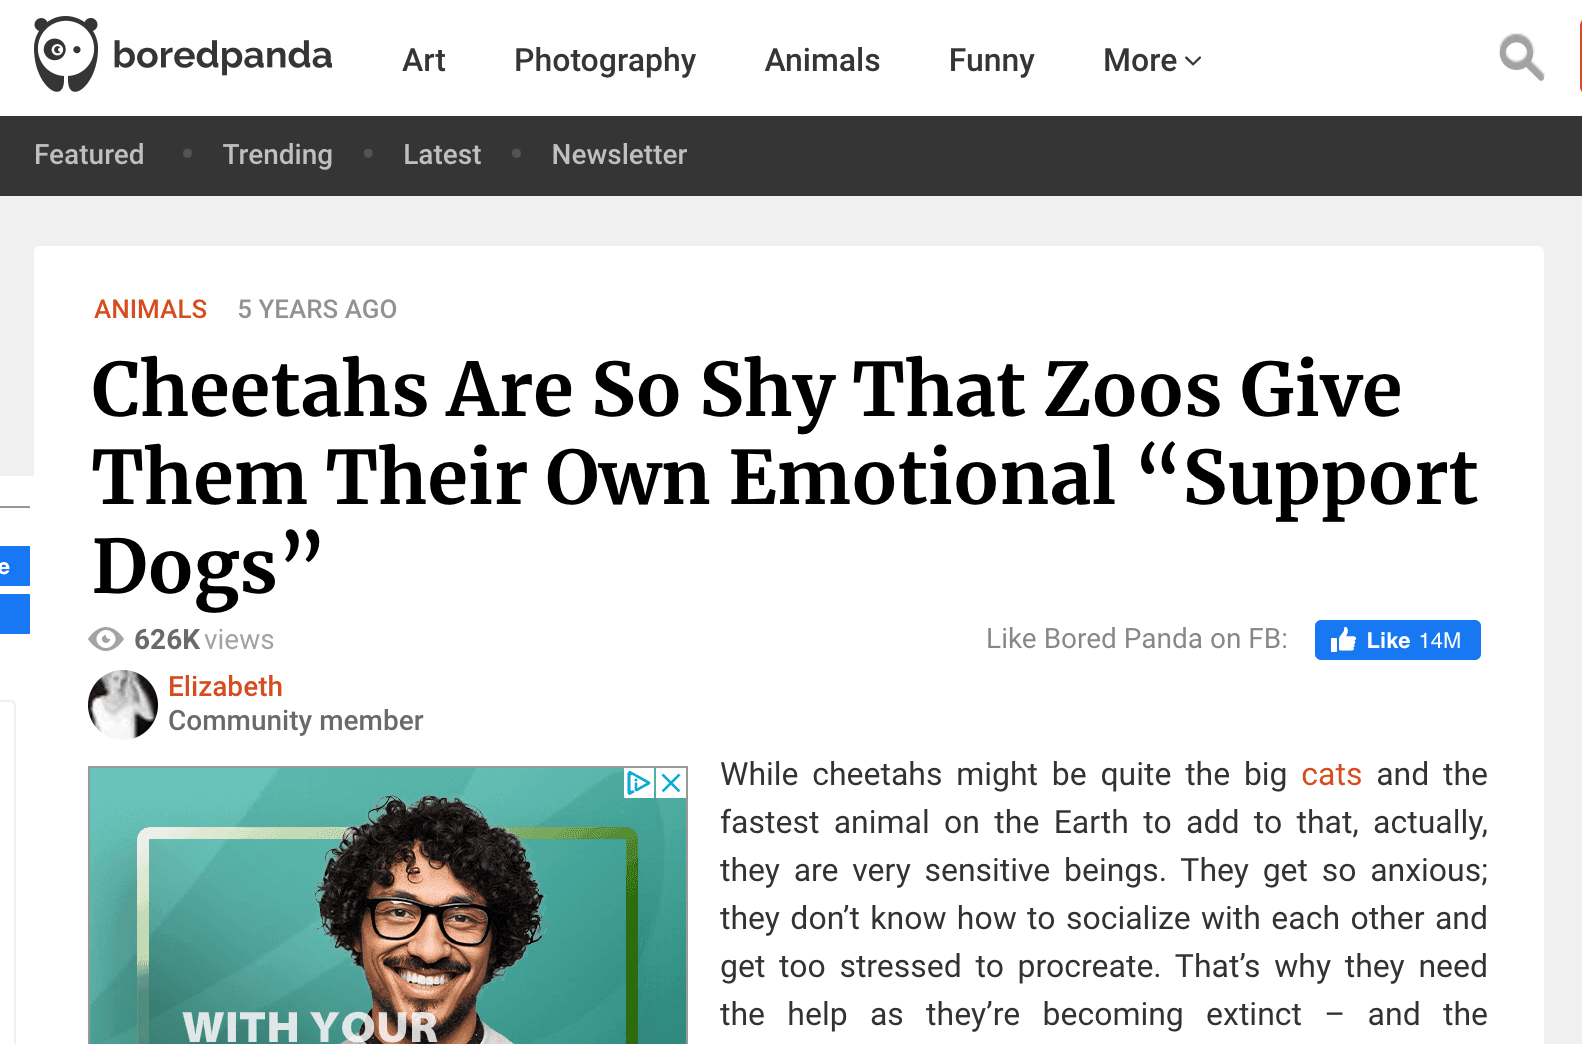 Example of an emotional headline from Bored Panda